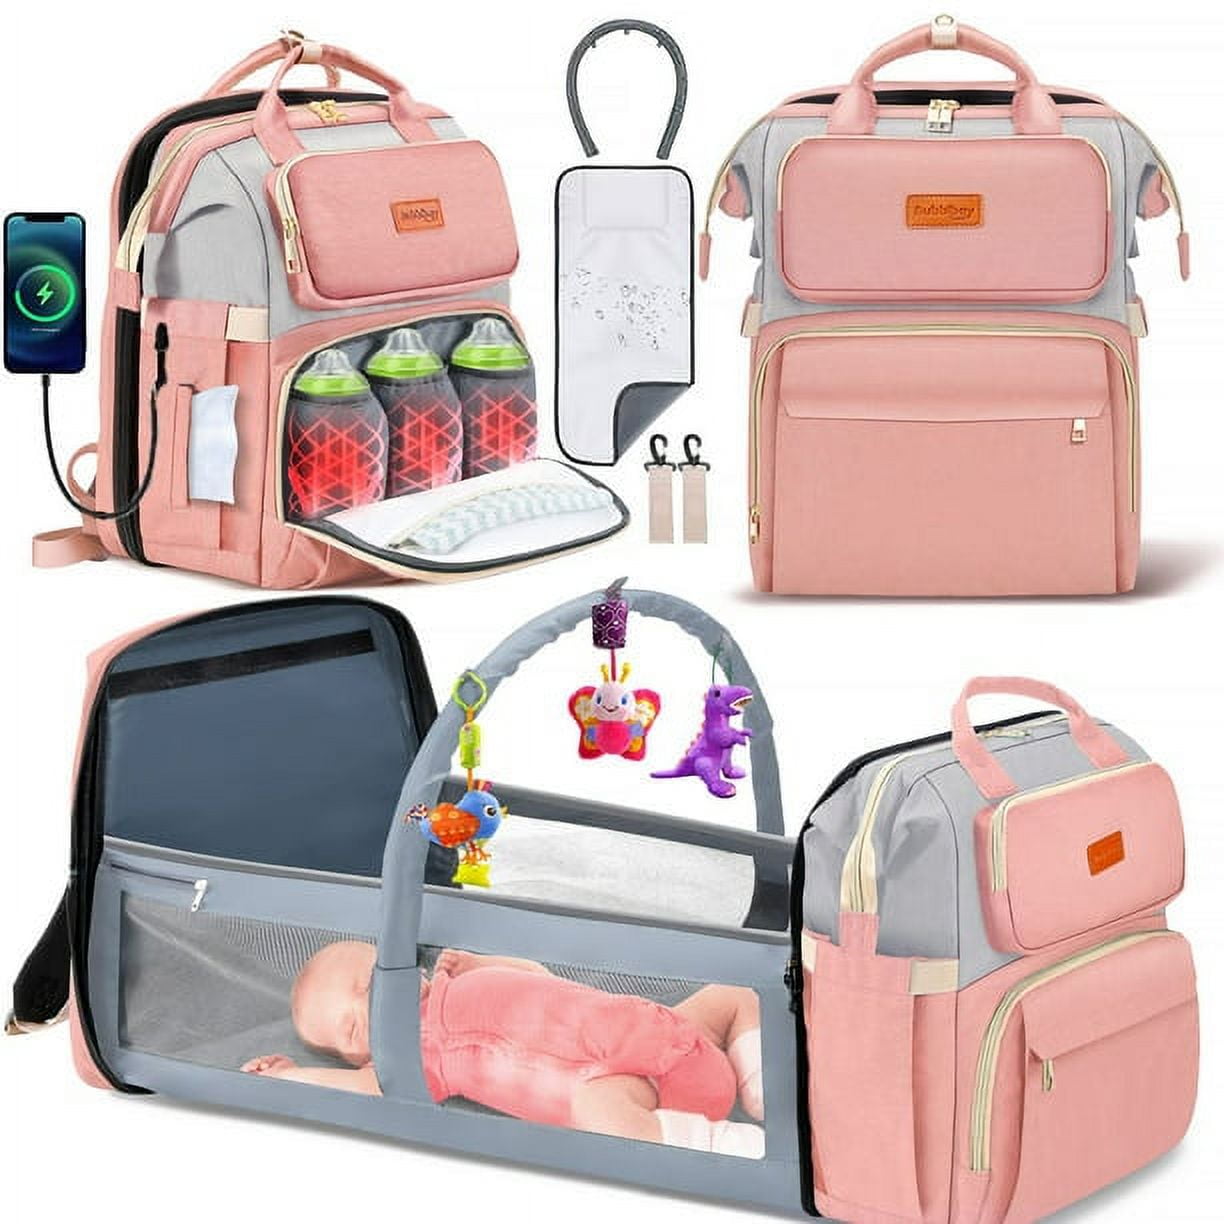 Diaper Bag Backpack with Changing Station, VICVEO Large Baby